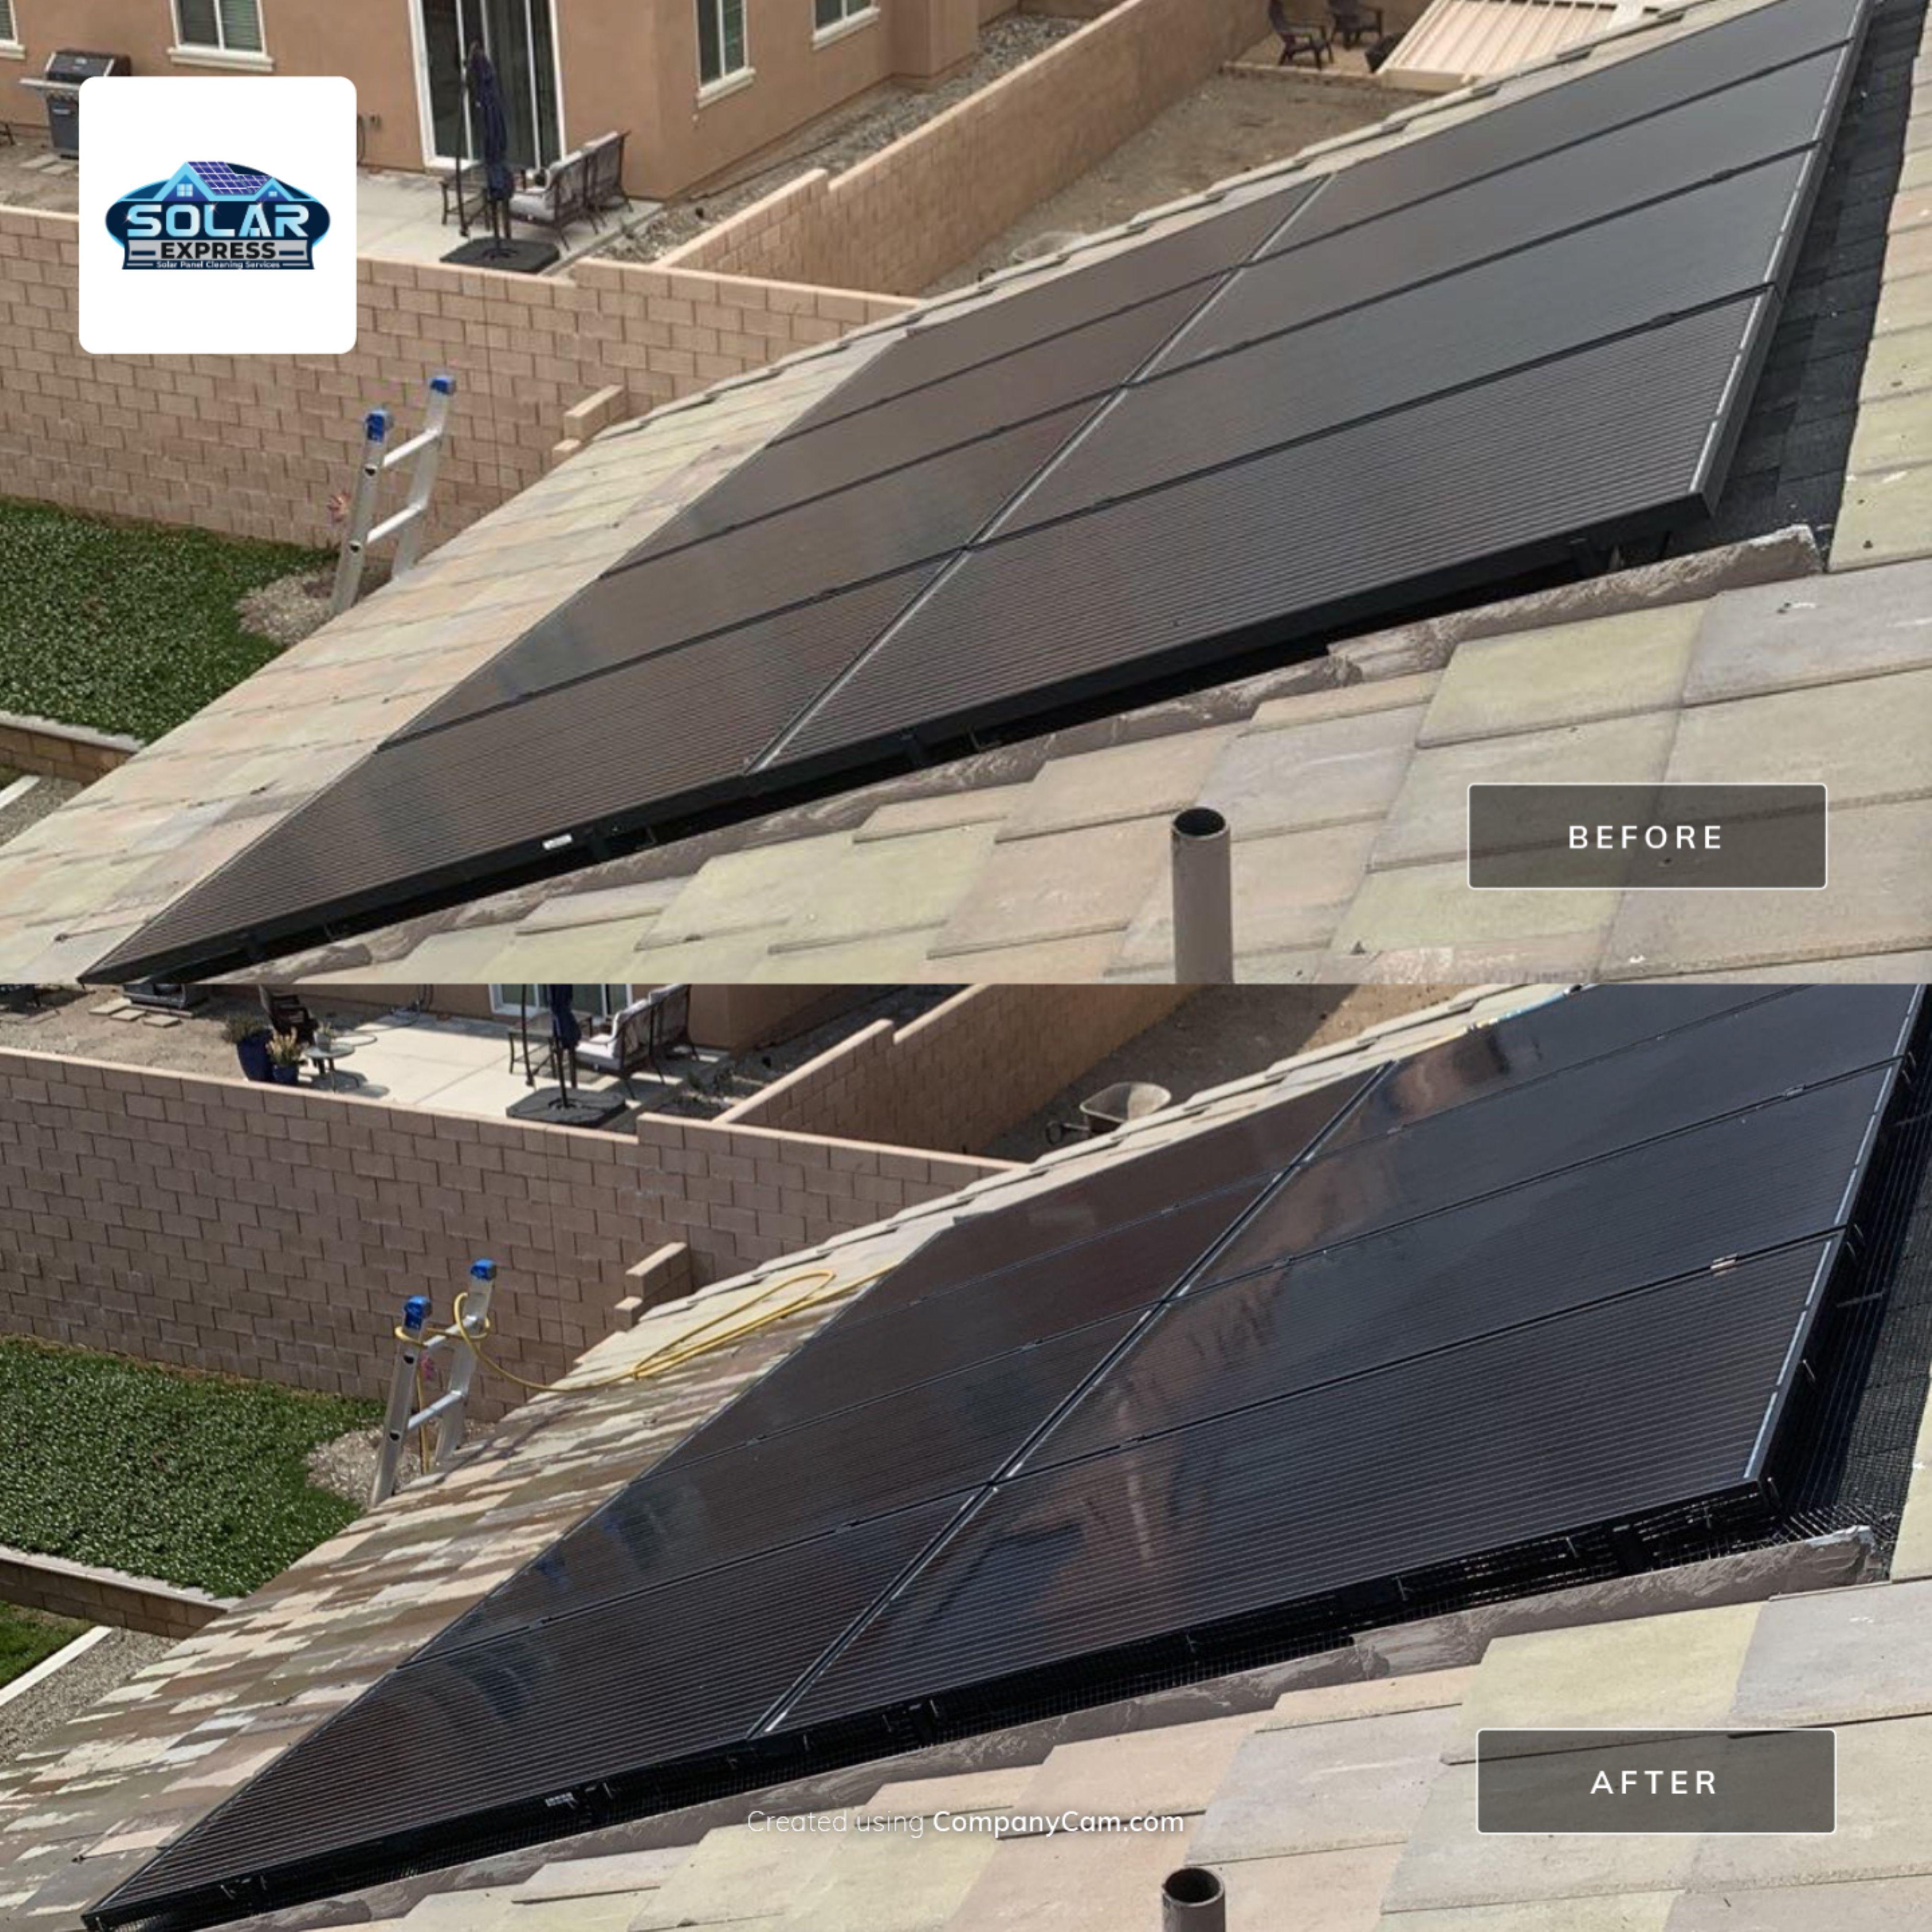 Solar Cleaning / bird proofing / Fontana, CA / Call us today!